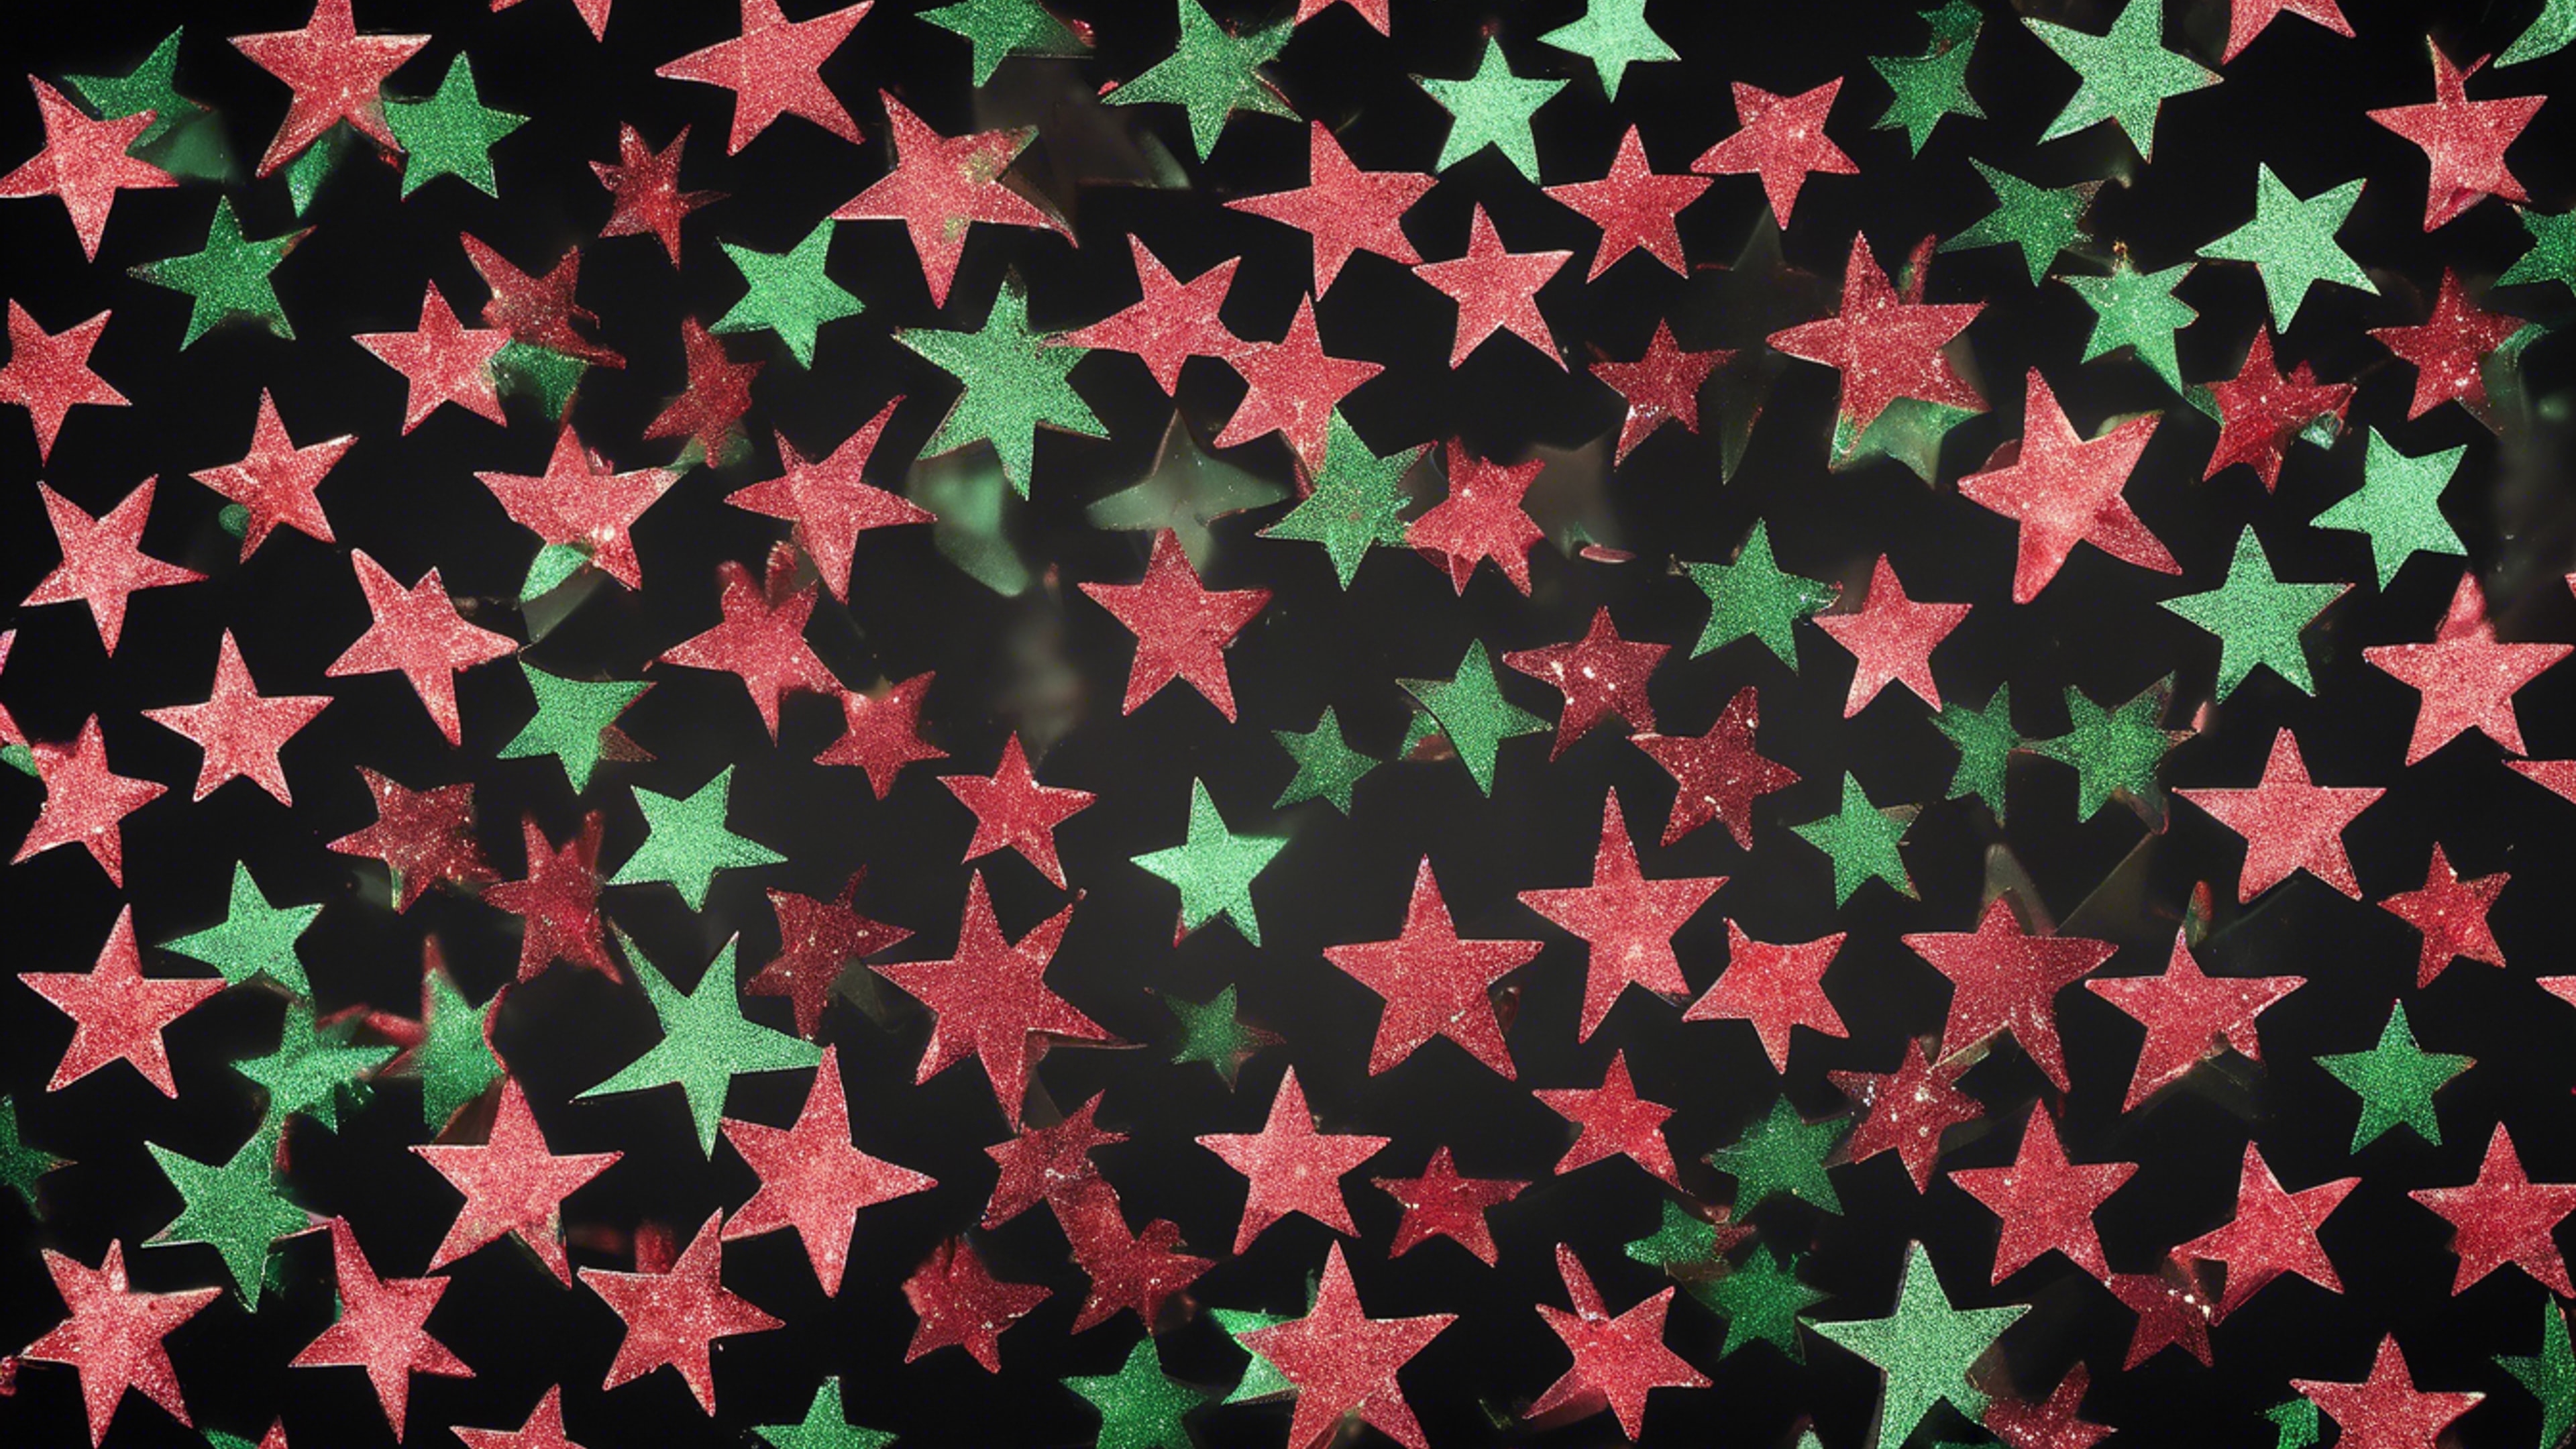 Green and red glitter forming star shapes on a black background Wallpaper[2fe752b5dc5f4f35ba35]